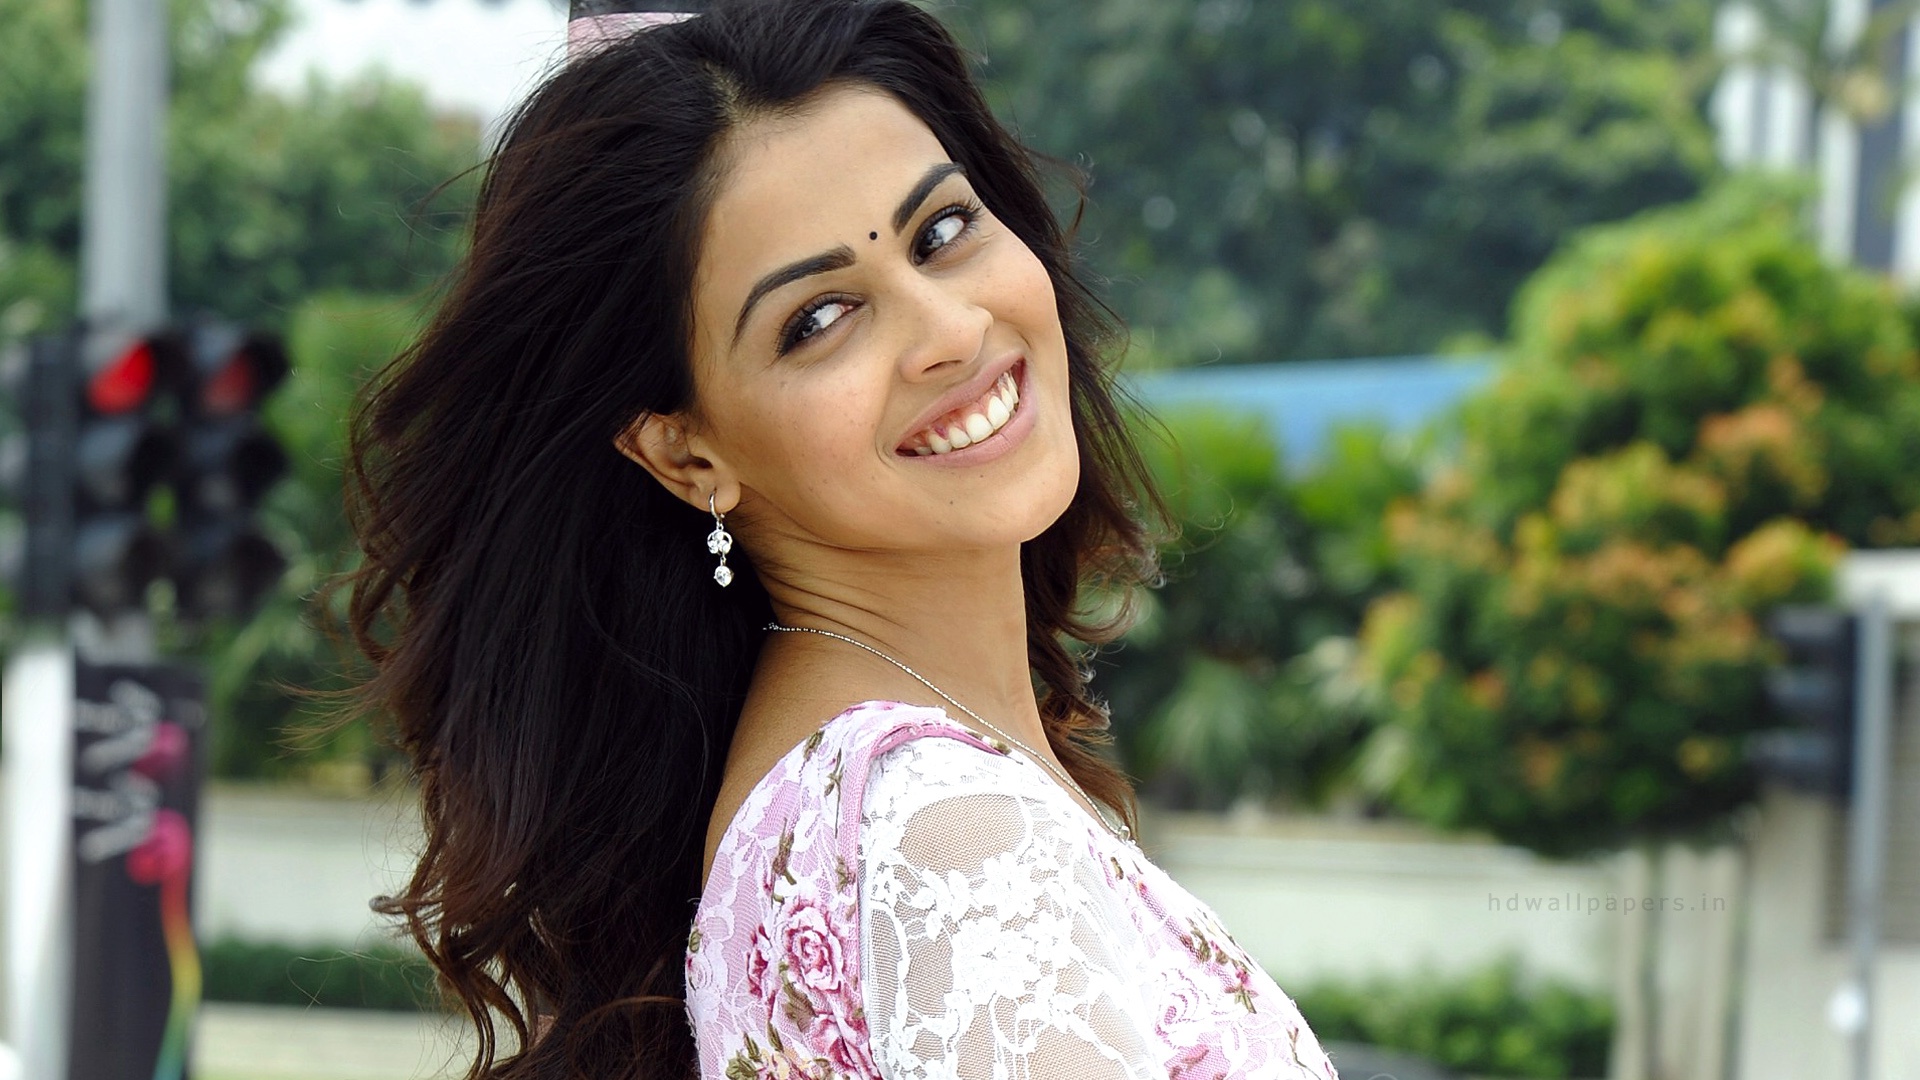 Genelia D'Souza Wallpapers High Resolution and Quality Download